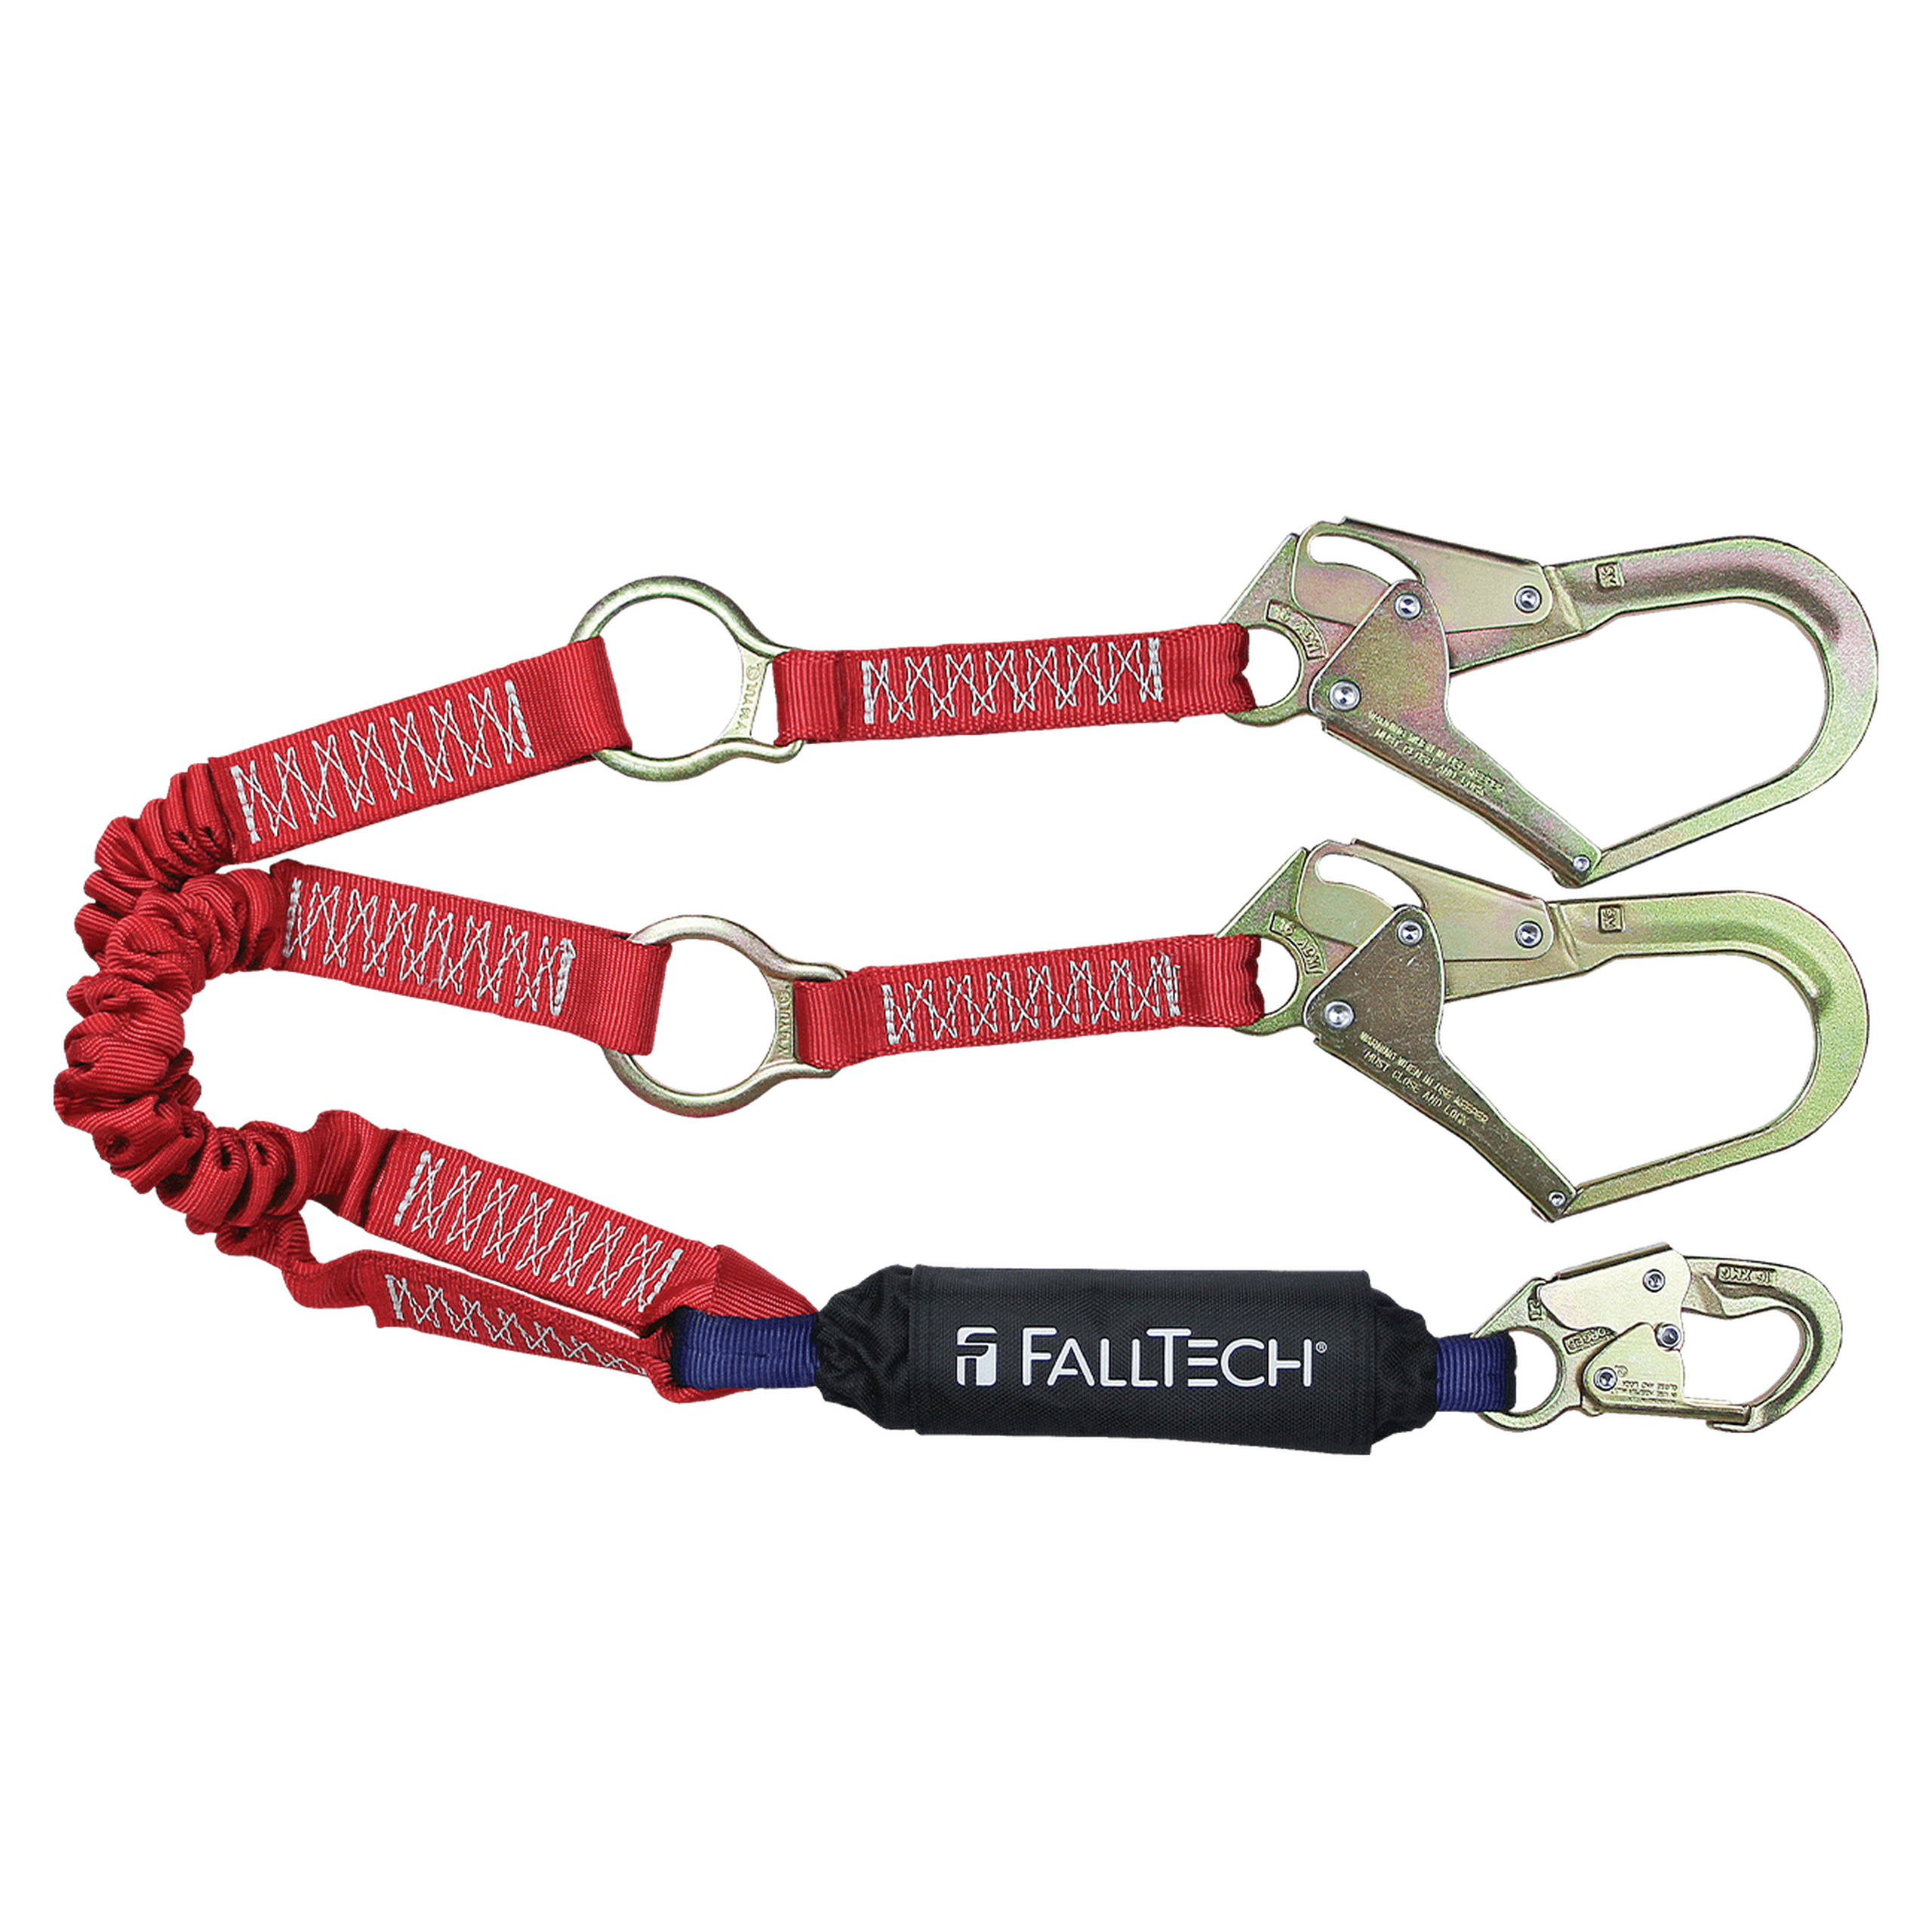 FallTech 8247EY3R 6' Ironman® 12' free fall Elasticated Energy Absorbing Lanyard, Double-leg with Rescue D-rings (each)